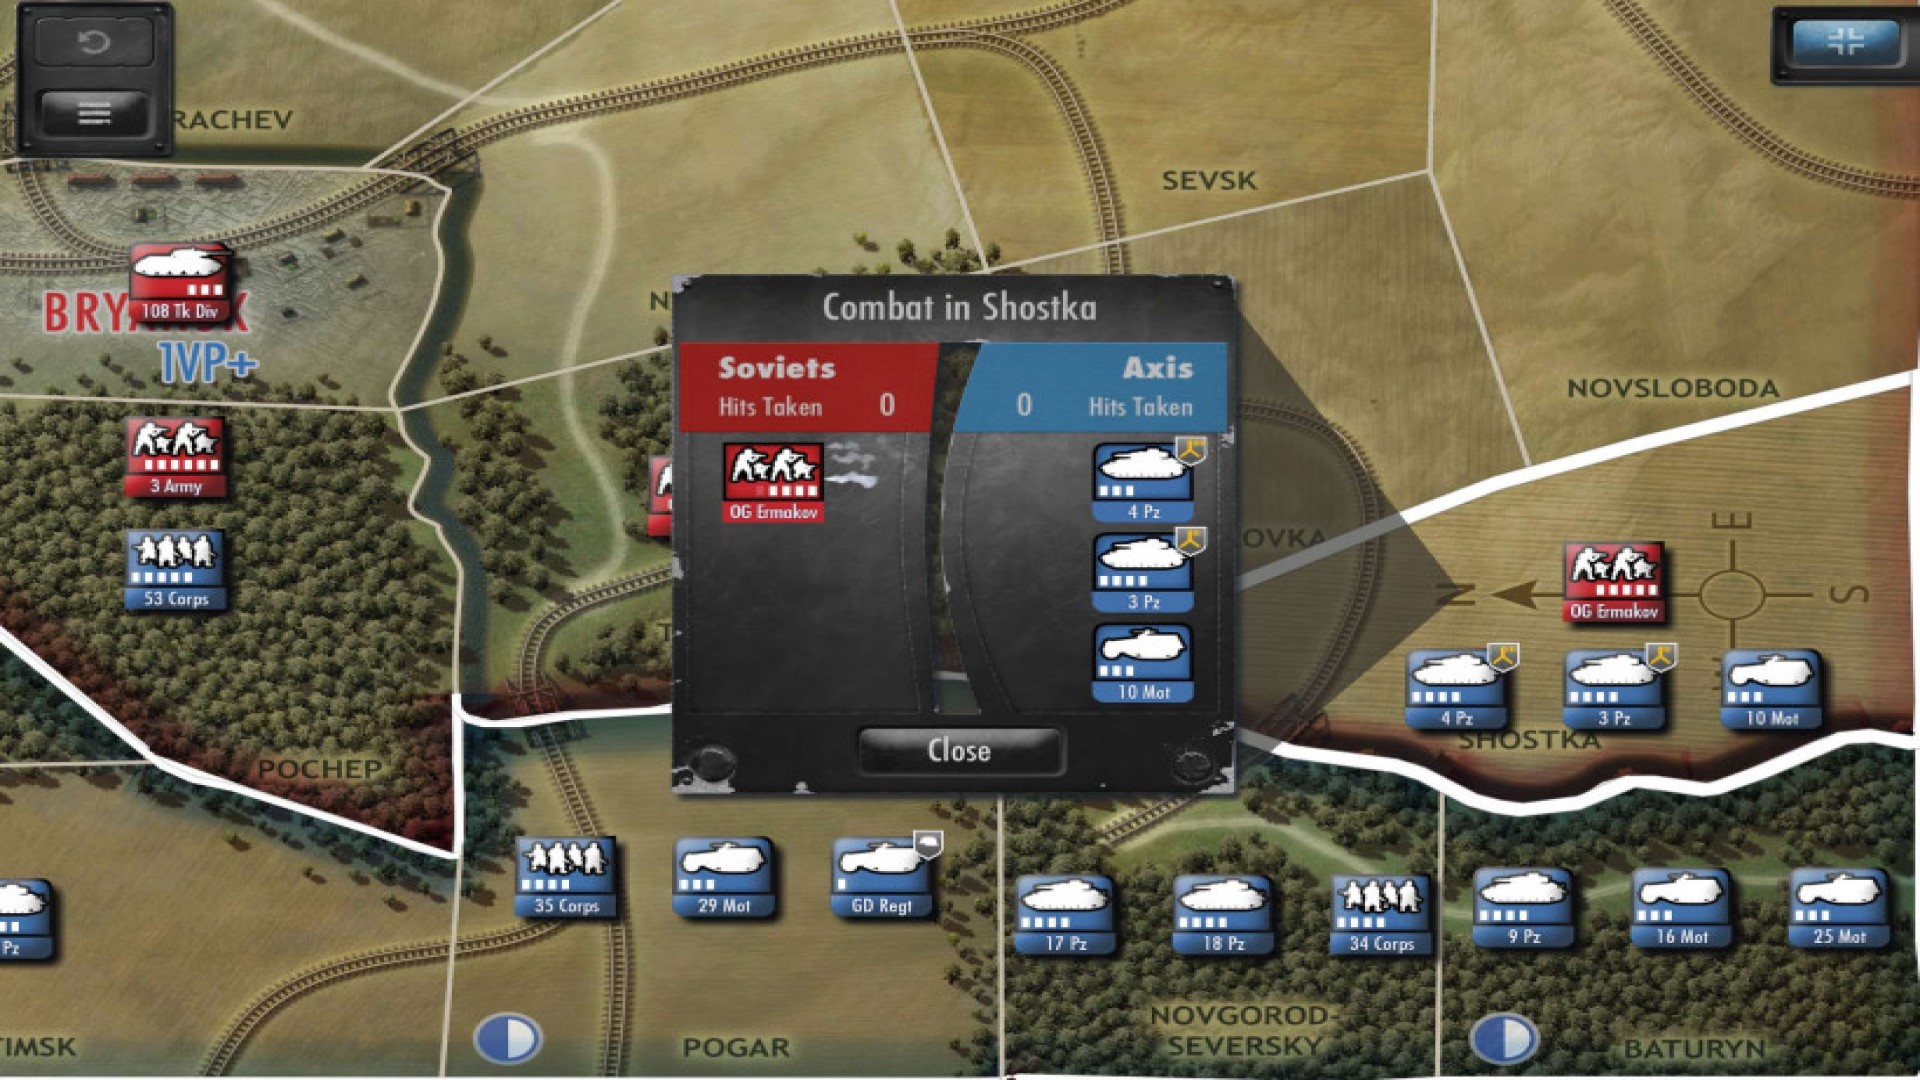 Best mobile war games: Drive on Moscow. Image shows a map of the Russian countryside, indicating where tanks are located.